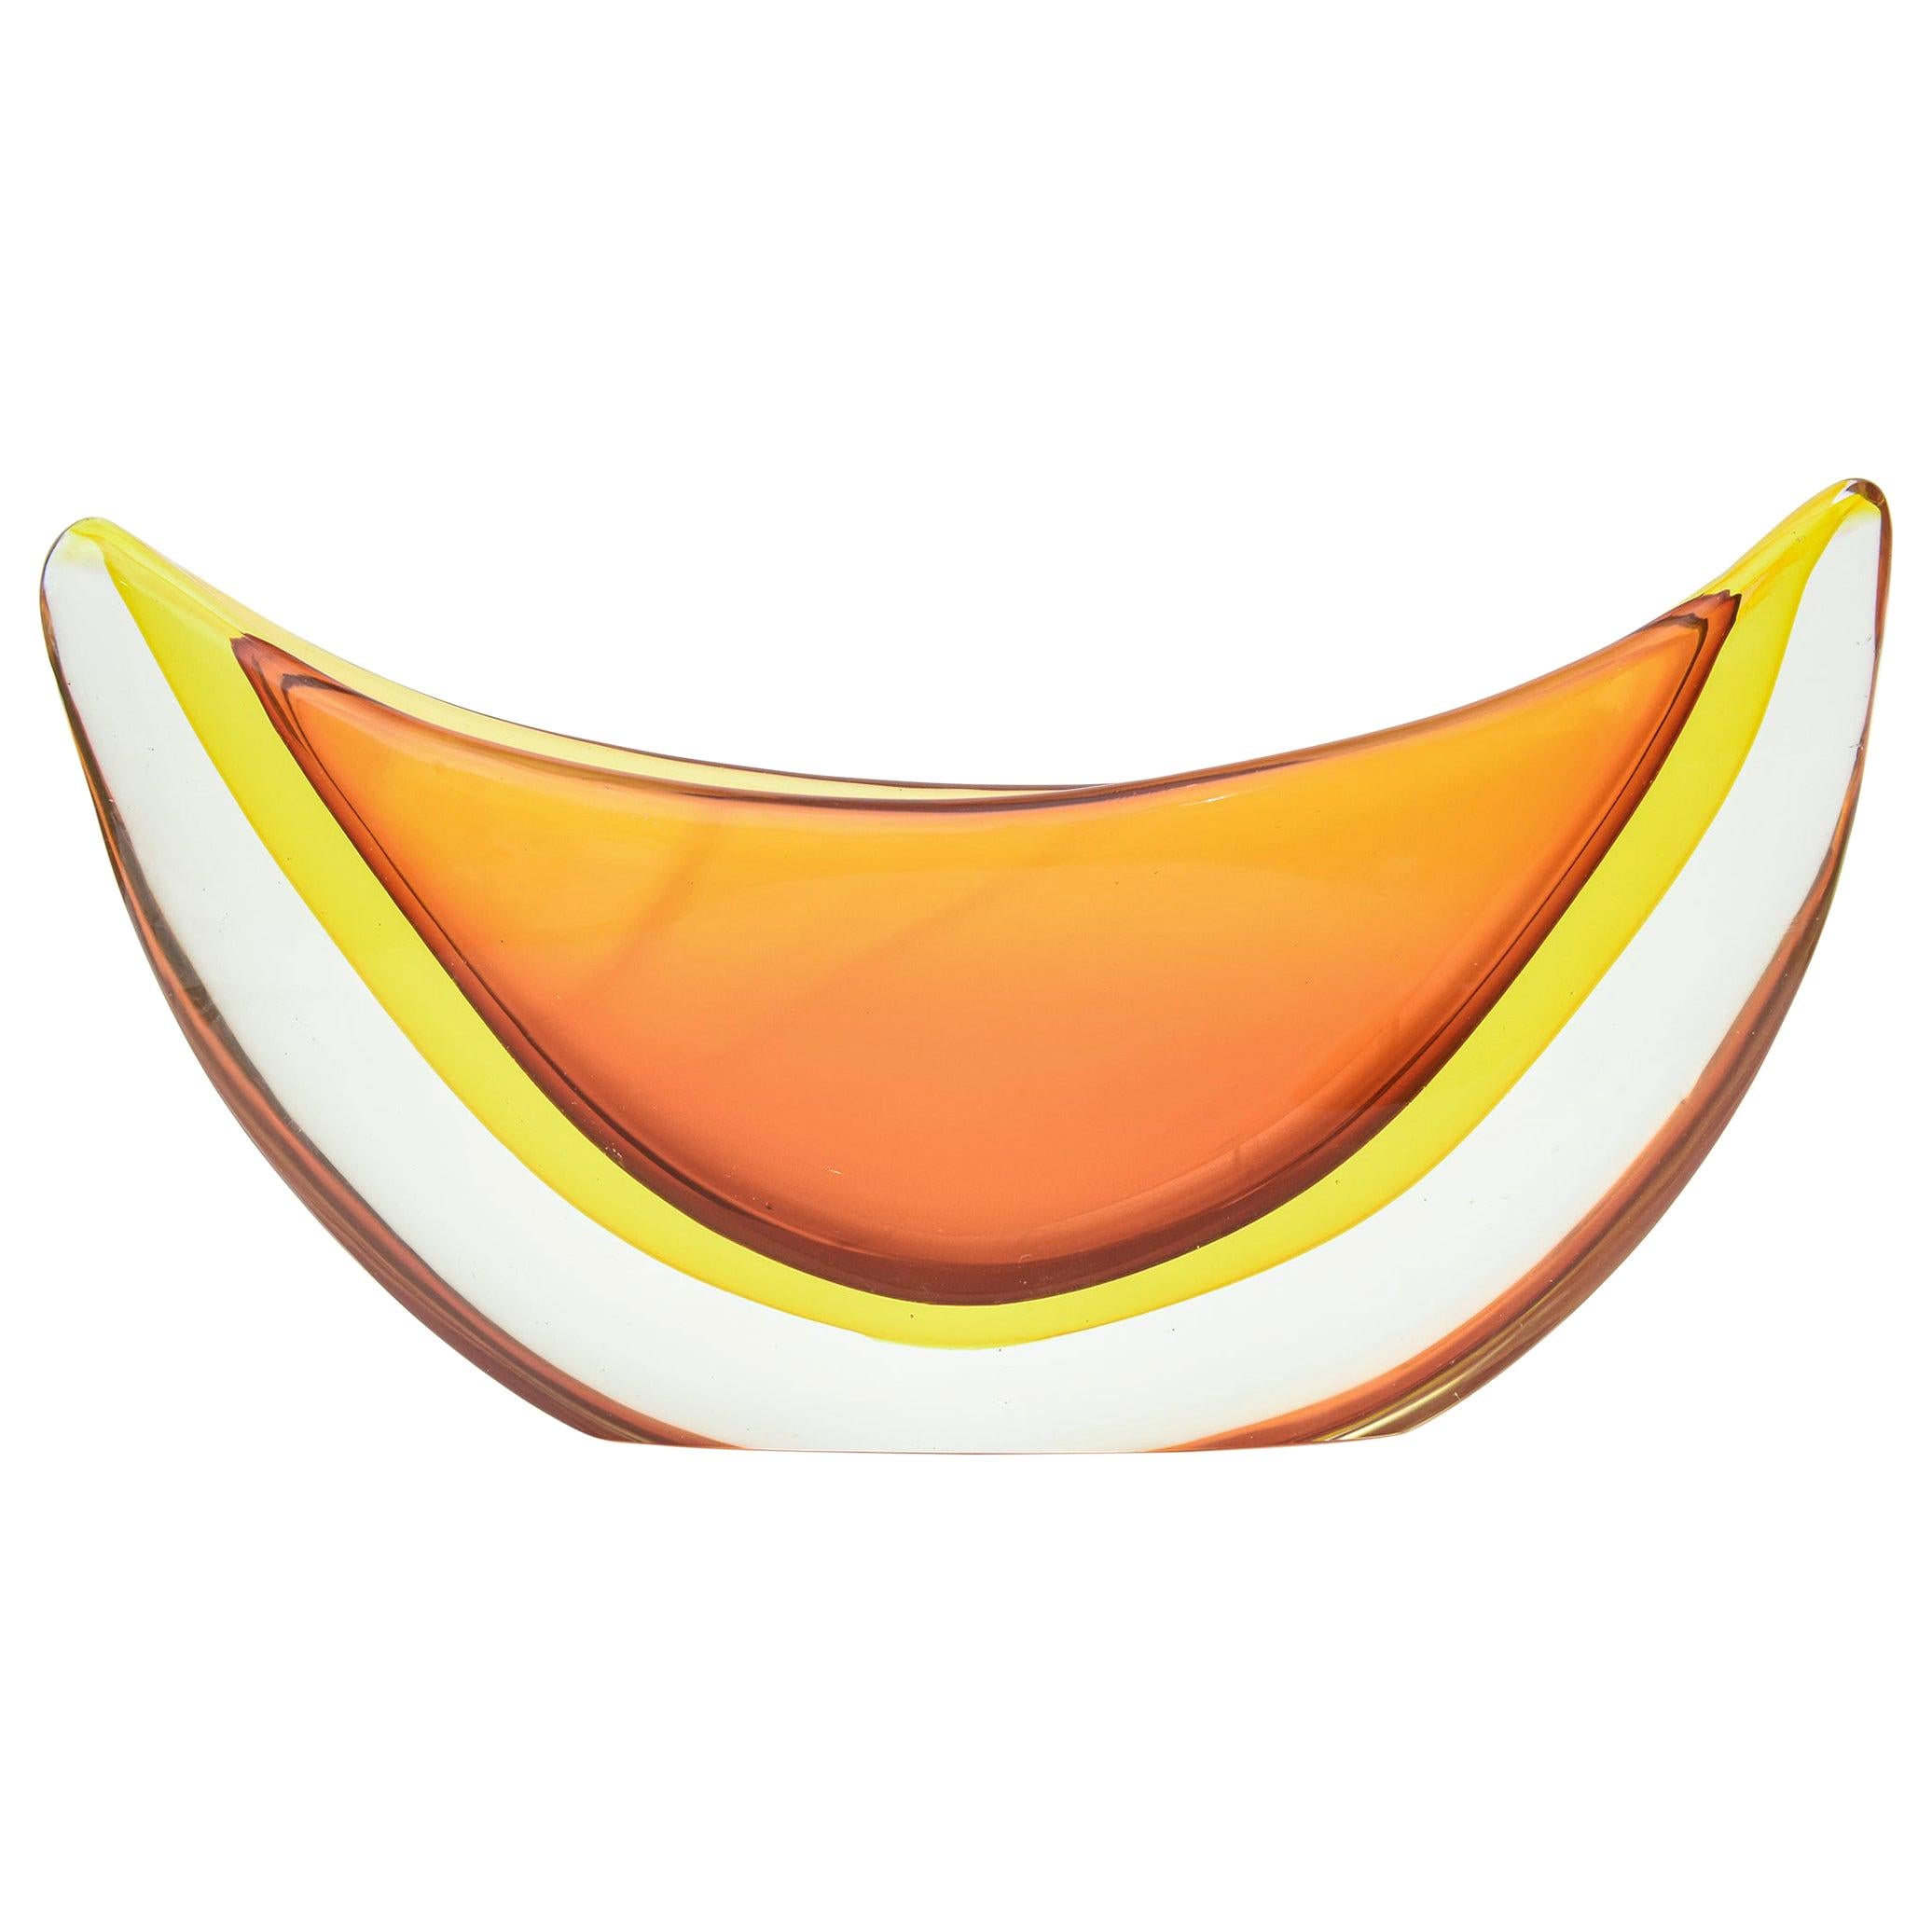 This stunning and monumental Italian Murano vintage Antonio da Ros for Cenedese Sommerso glass bowl vessel or vase is a piece of sculpture in gorgeous colored sommerso glass form. It has the shape of a large orange slice or a canoe form. It is heavy